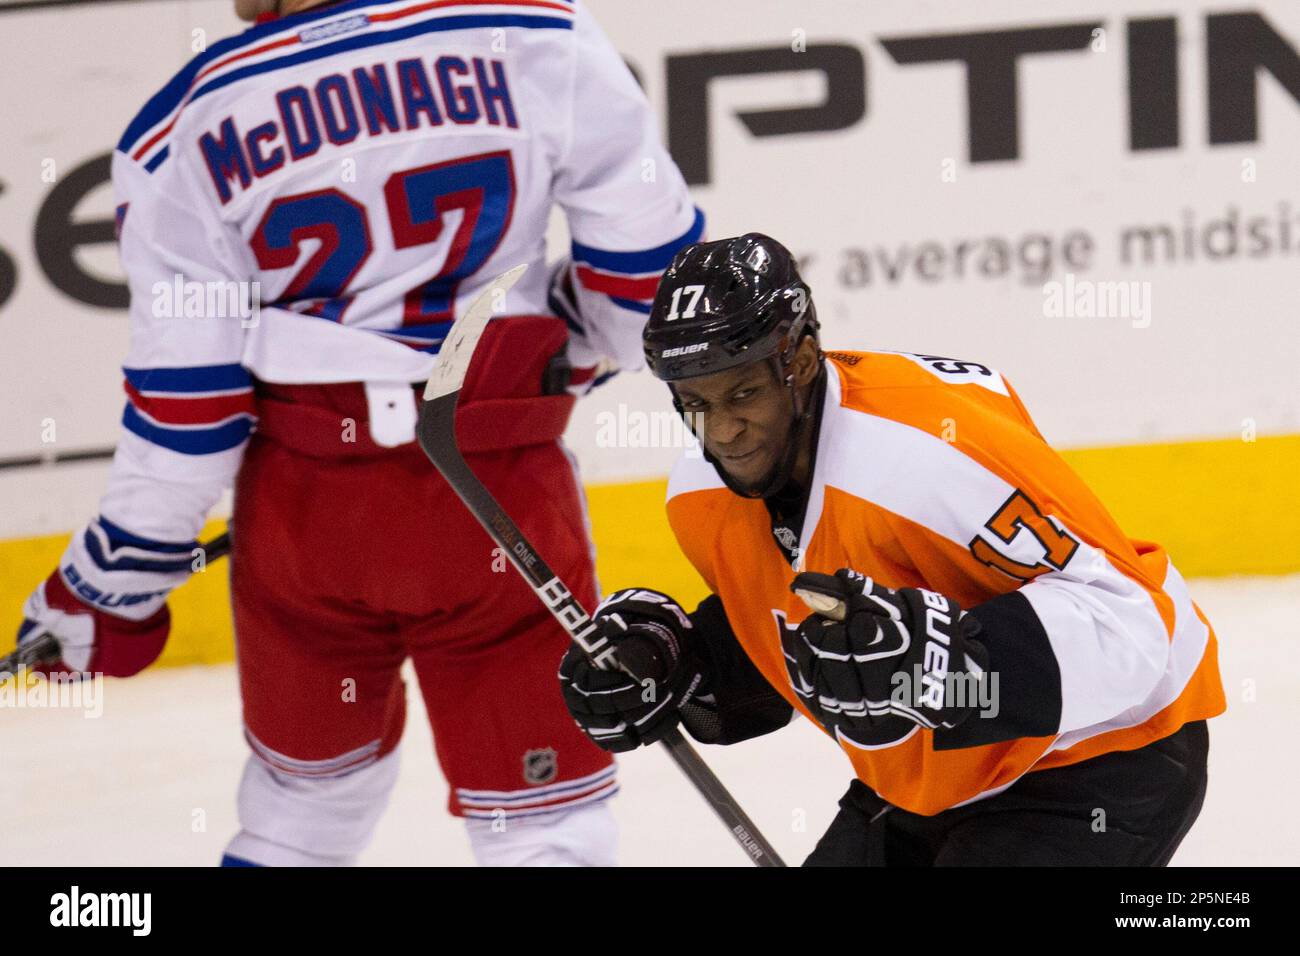 Wayne Simmonds still has some fight in him, but will it be for Flyers?